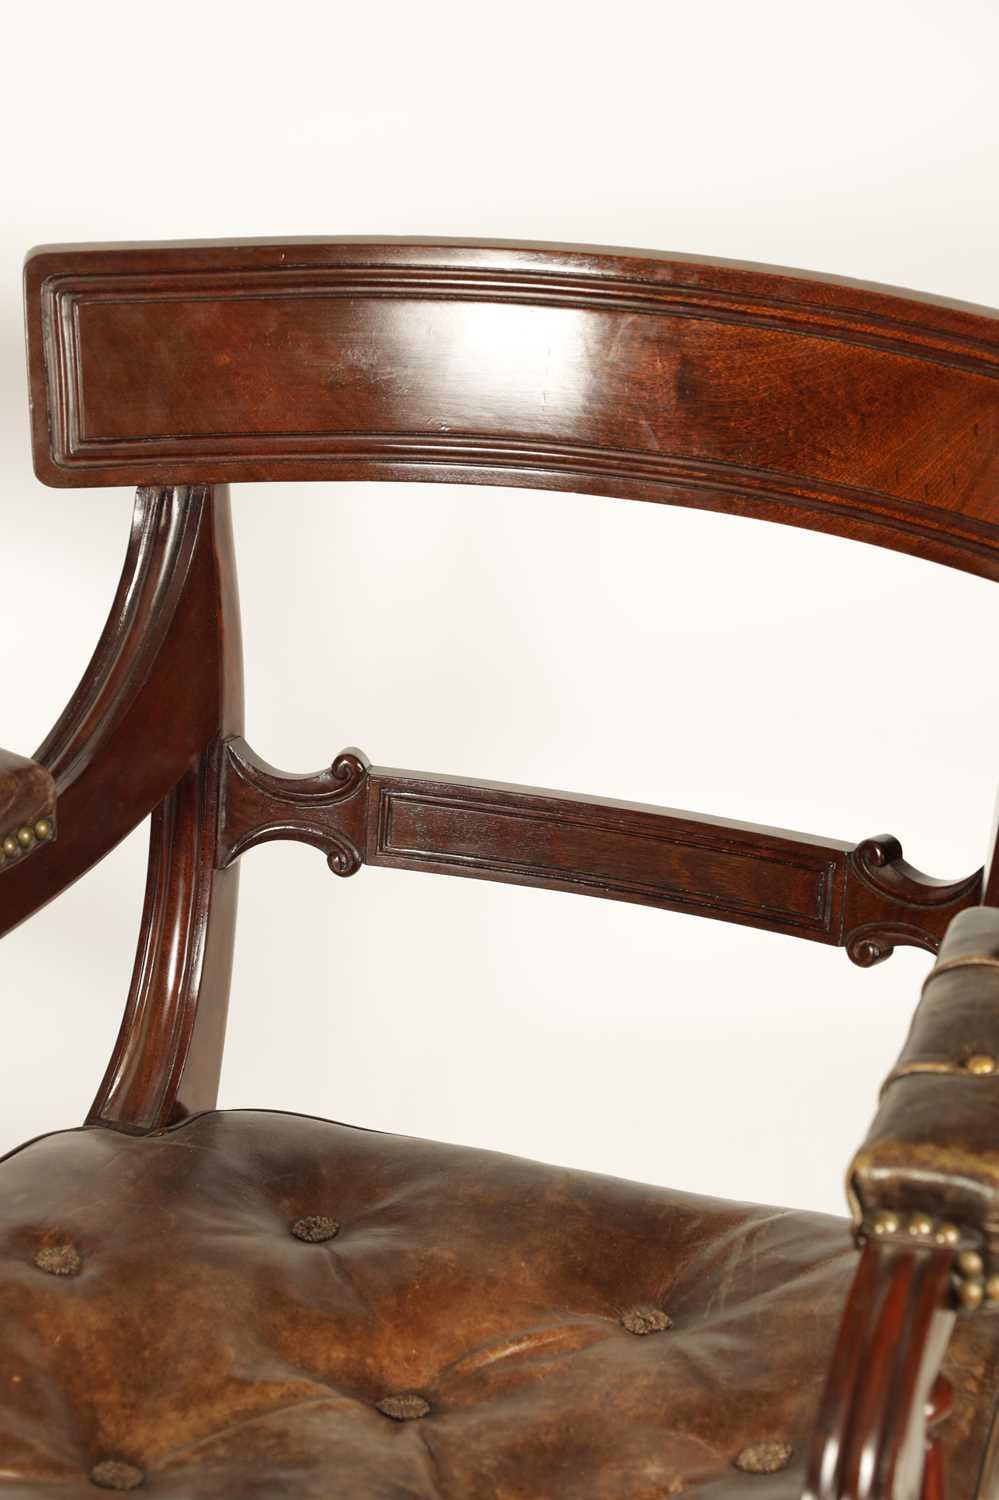 A GOOD PAIR OF REGENCY STYLE MAHOGANY DESK CHAIRS IN THE MANNER OF GILLOWS - Image 3 of 10